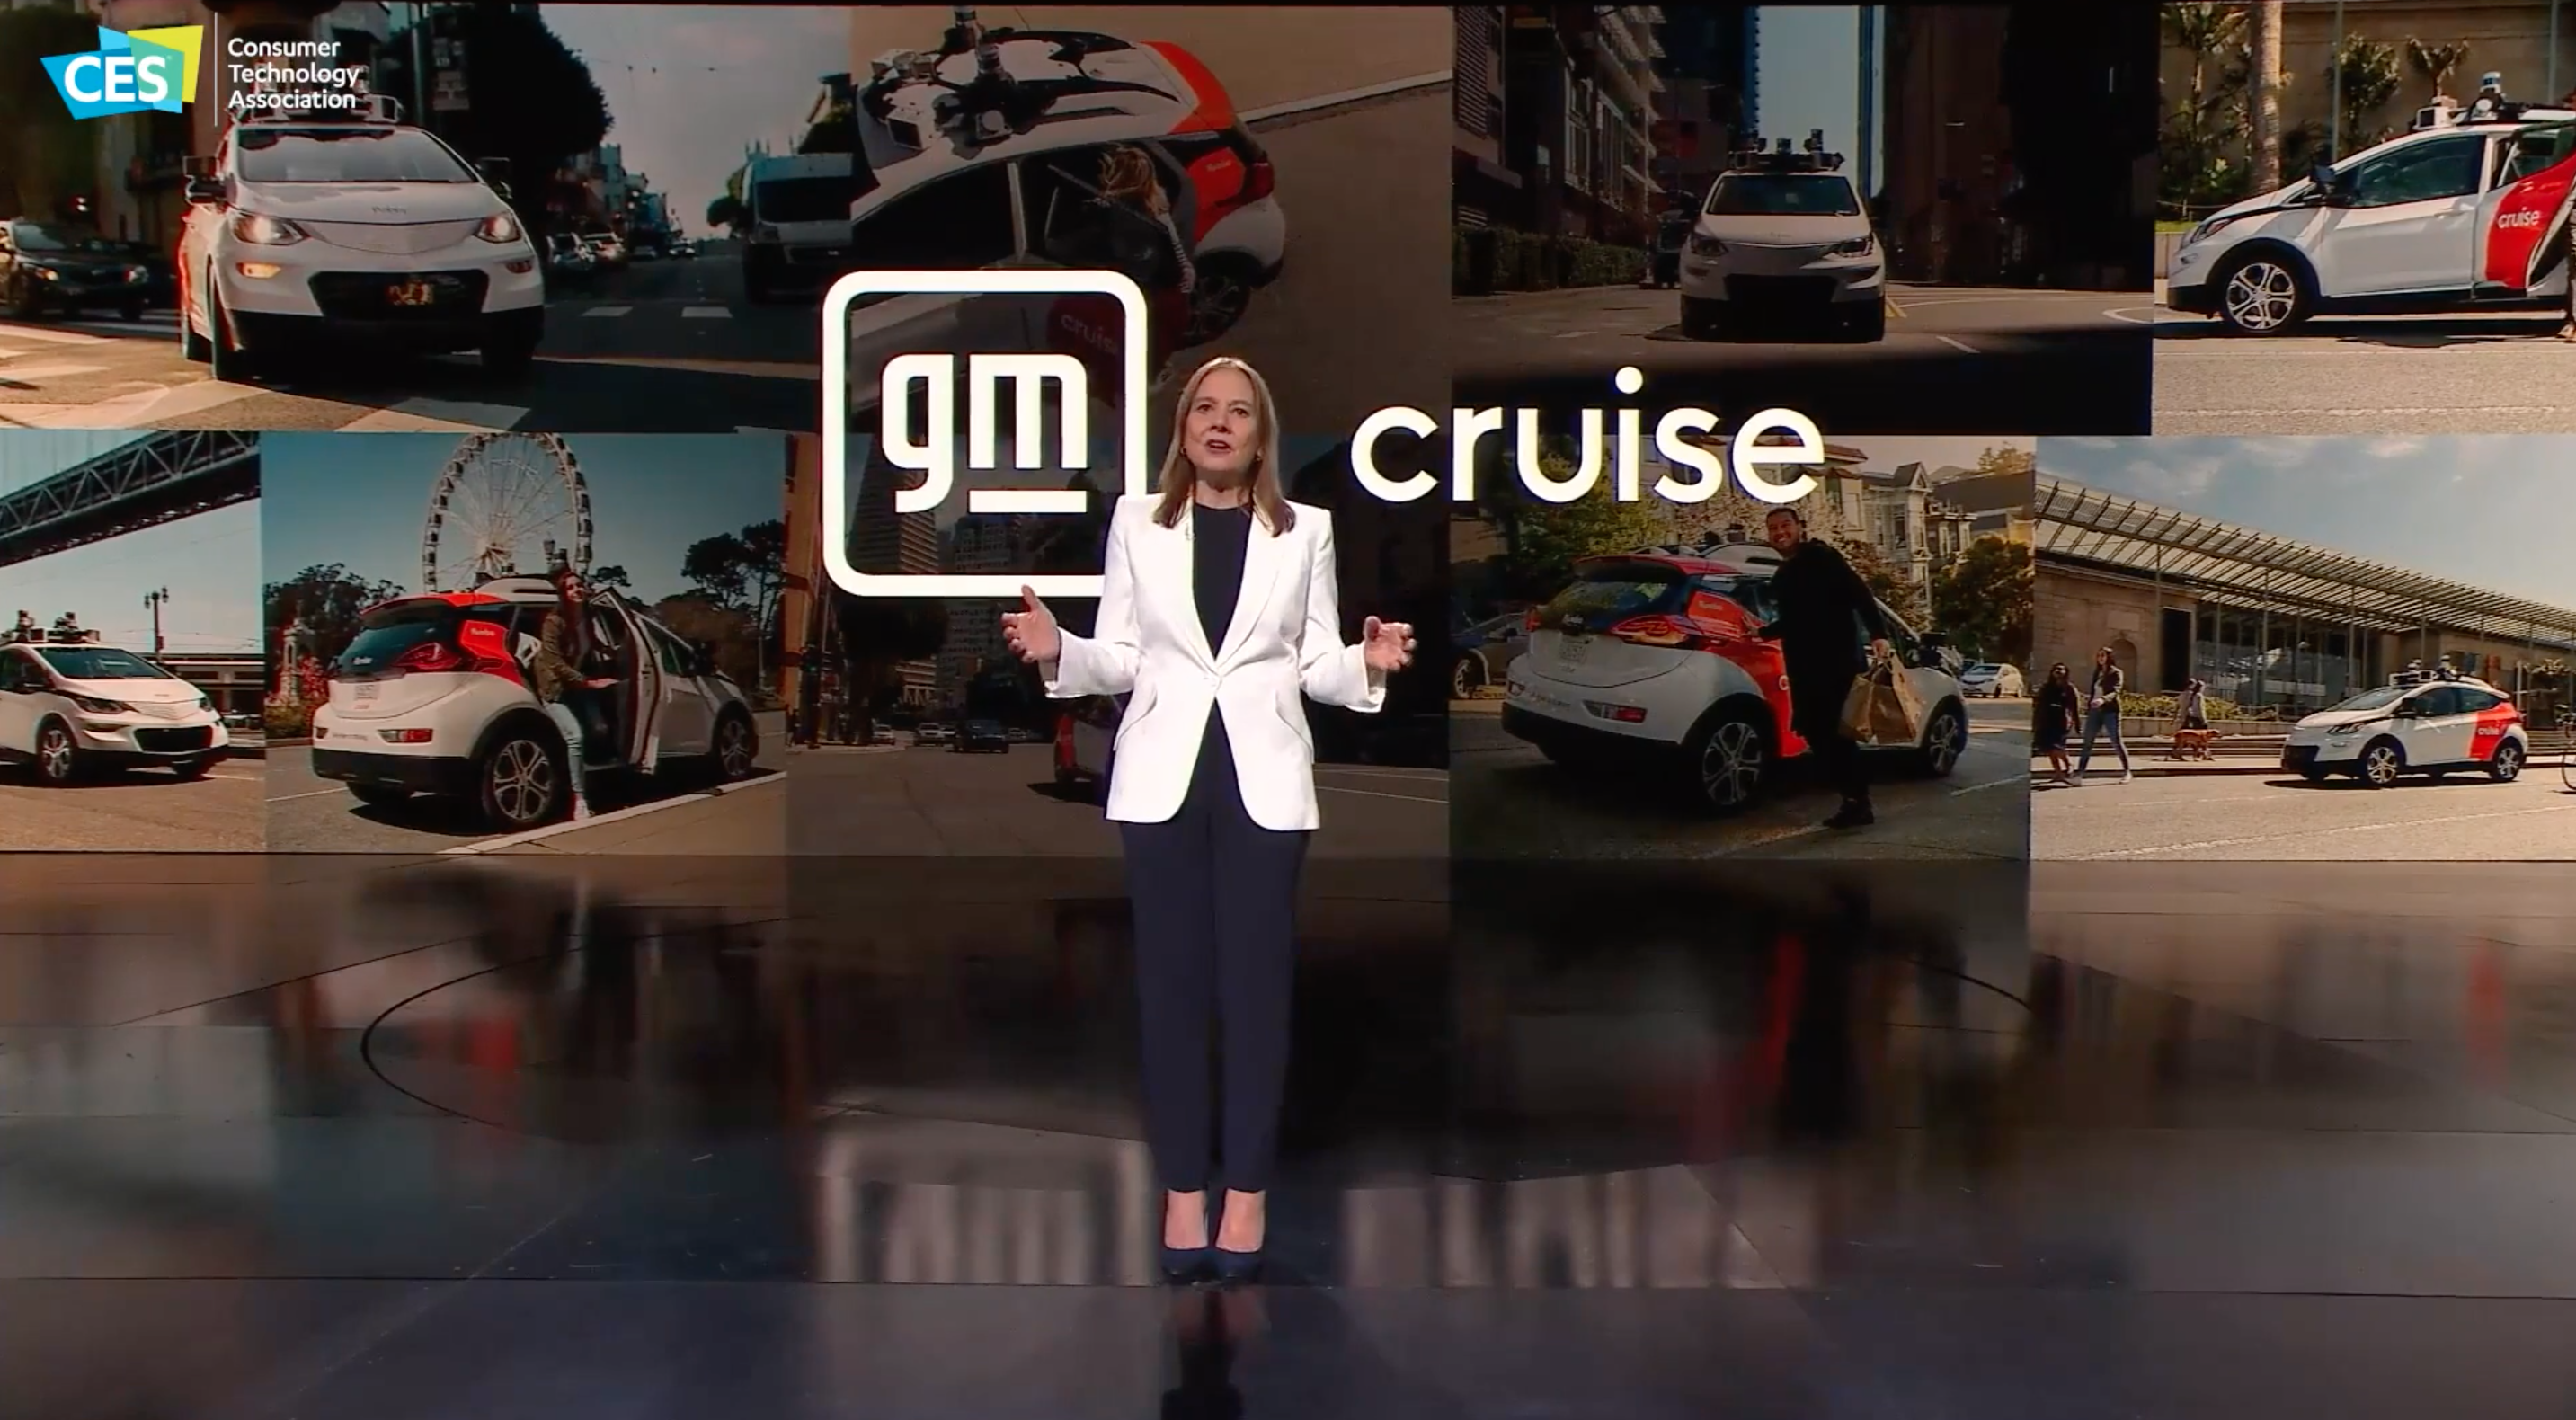 General Motors will launch fully autonomous driving models for the consumer market by 2025.